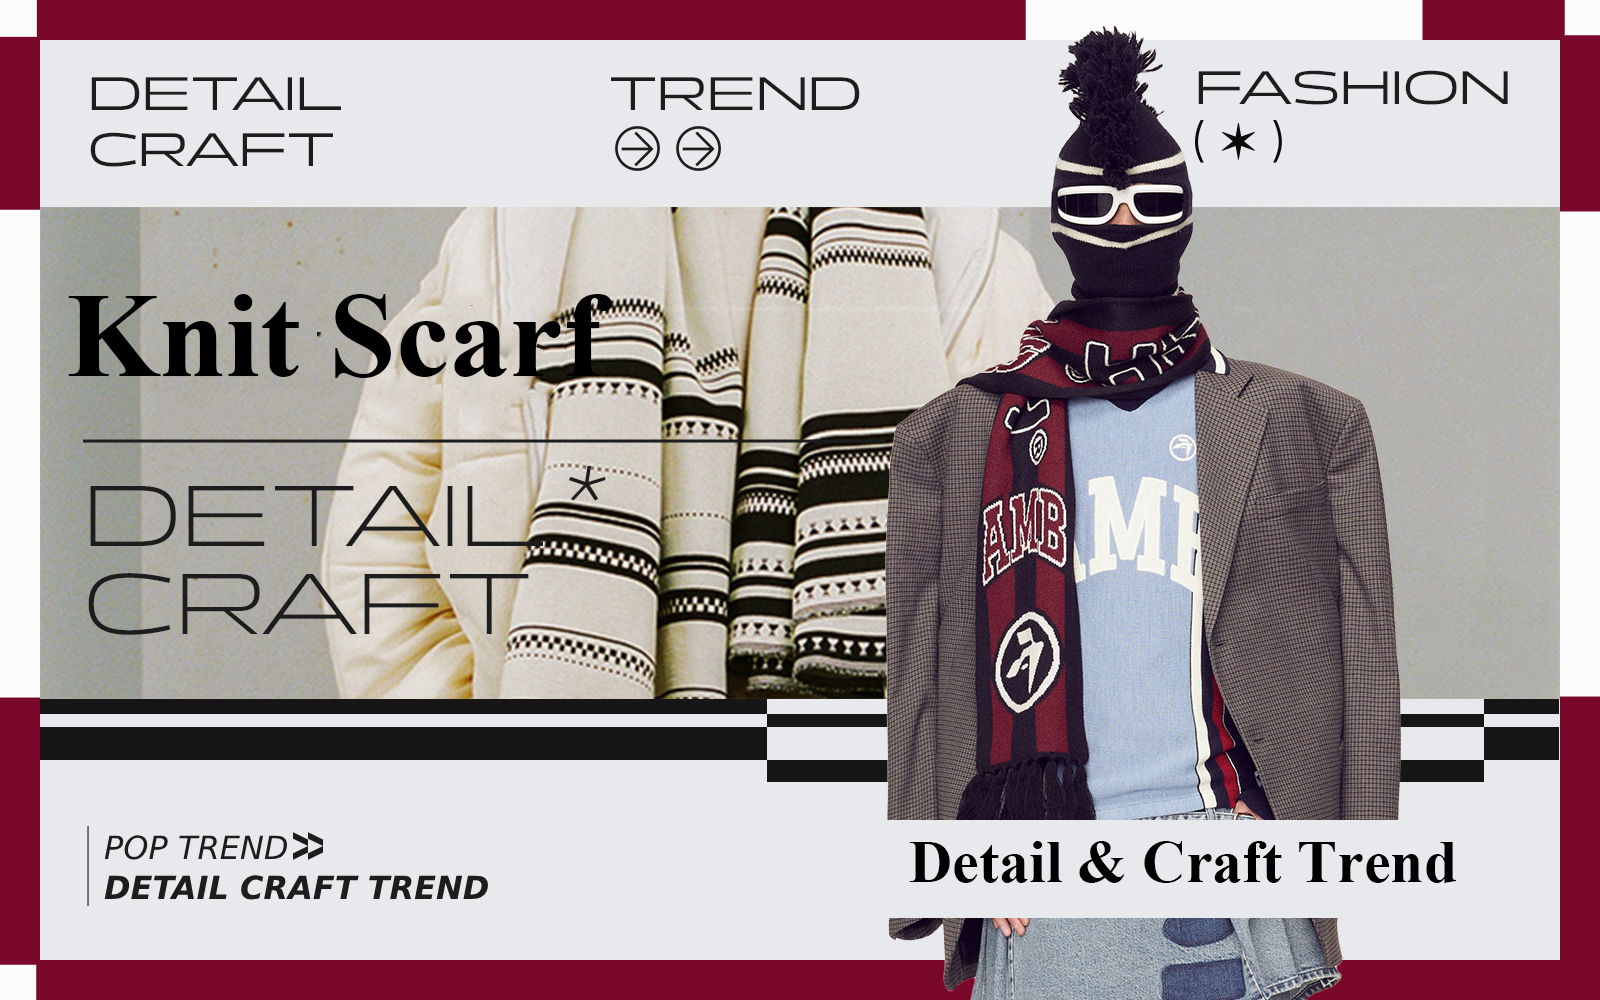 Winter Warmth -- The Detail & Craft Trend for Knit Scarf